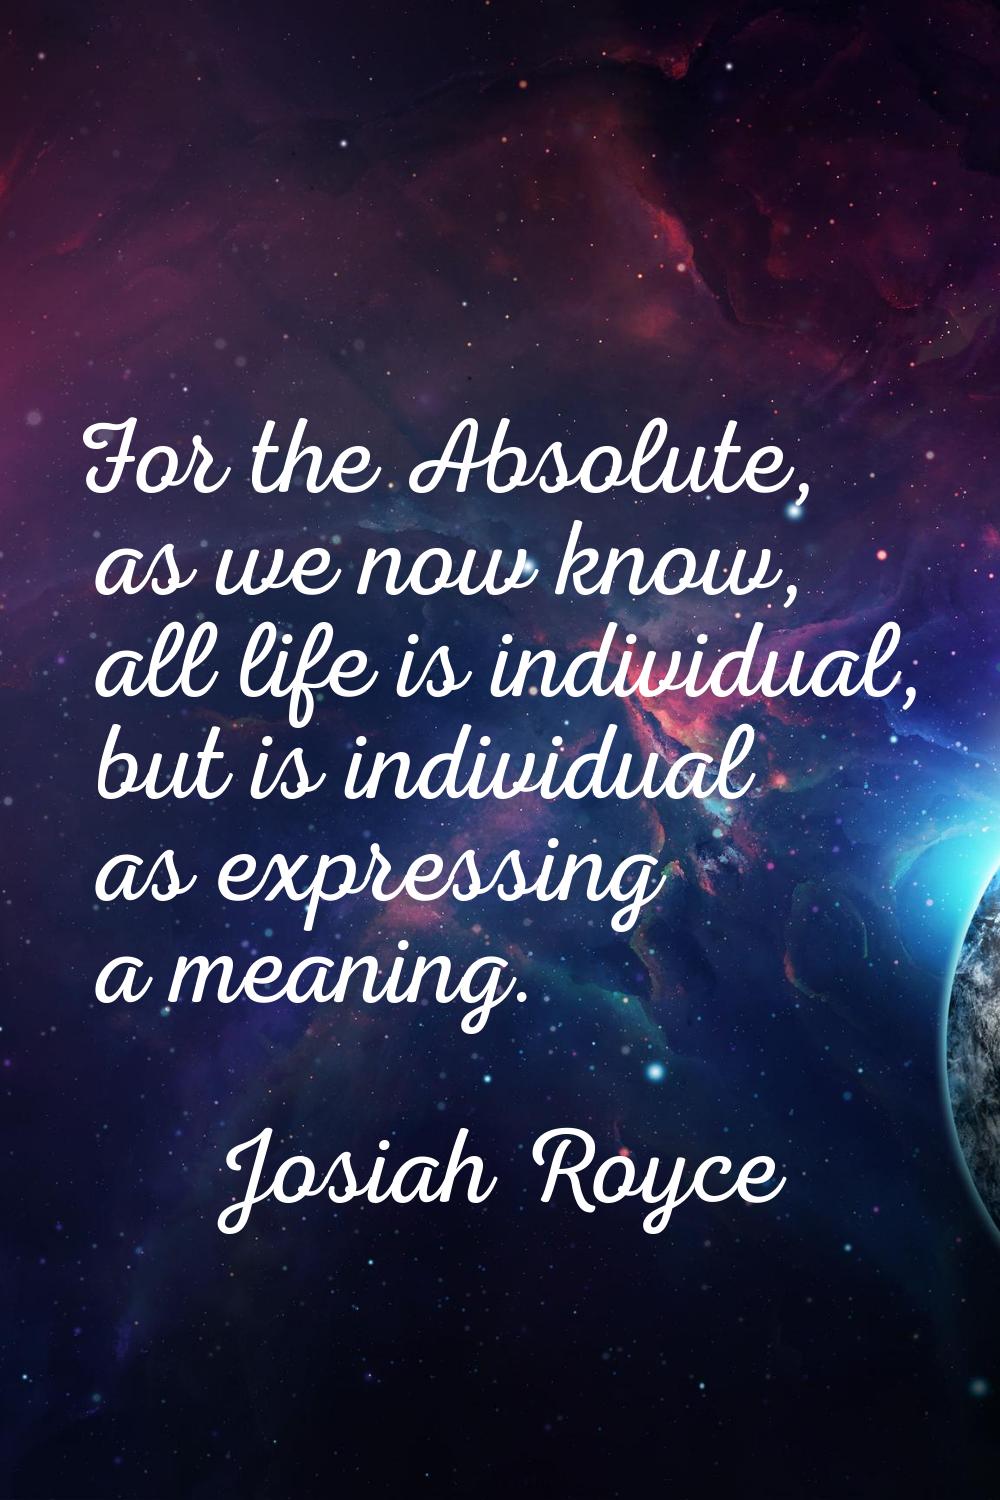 For the Absolute, as we now know, all life is individual, but is individual as expressing a meaning